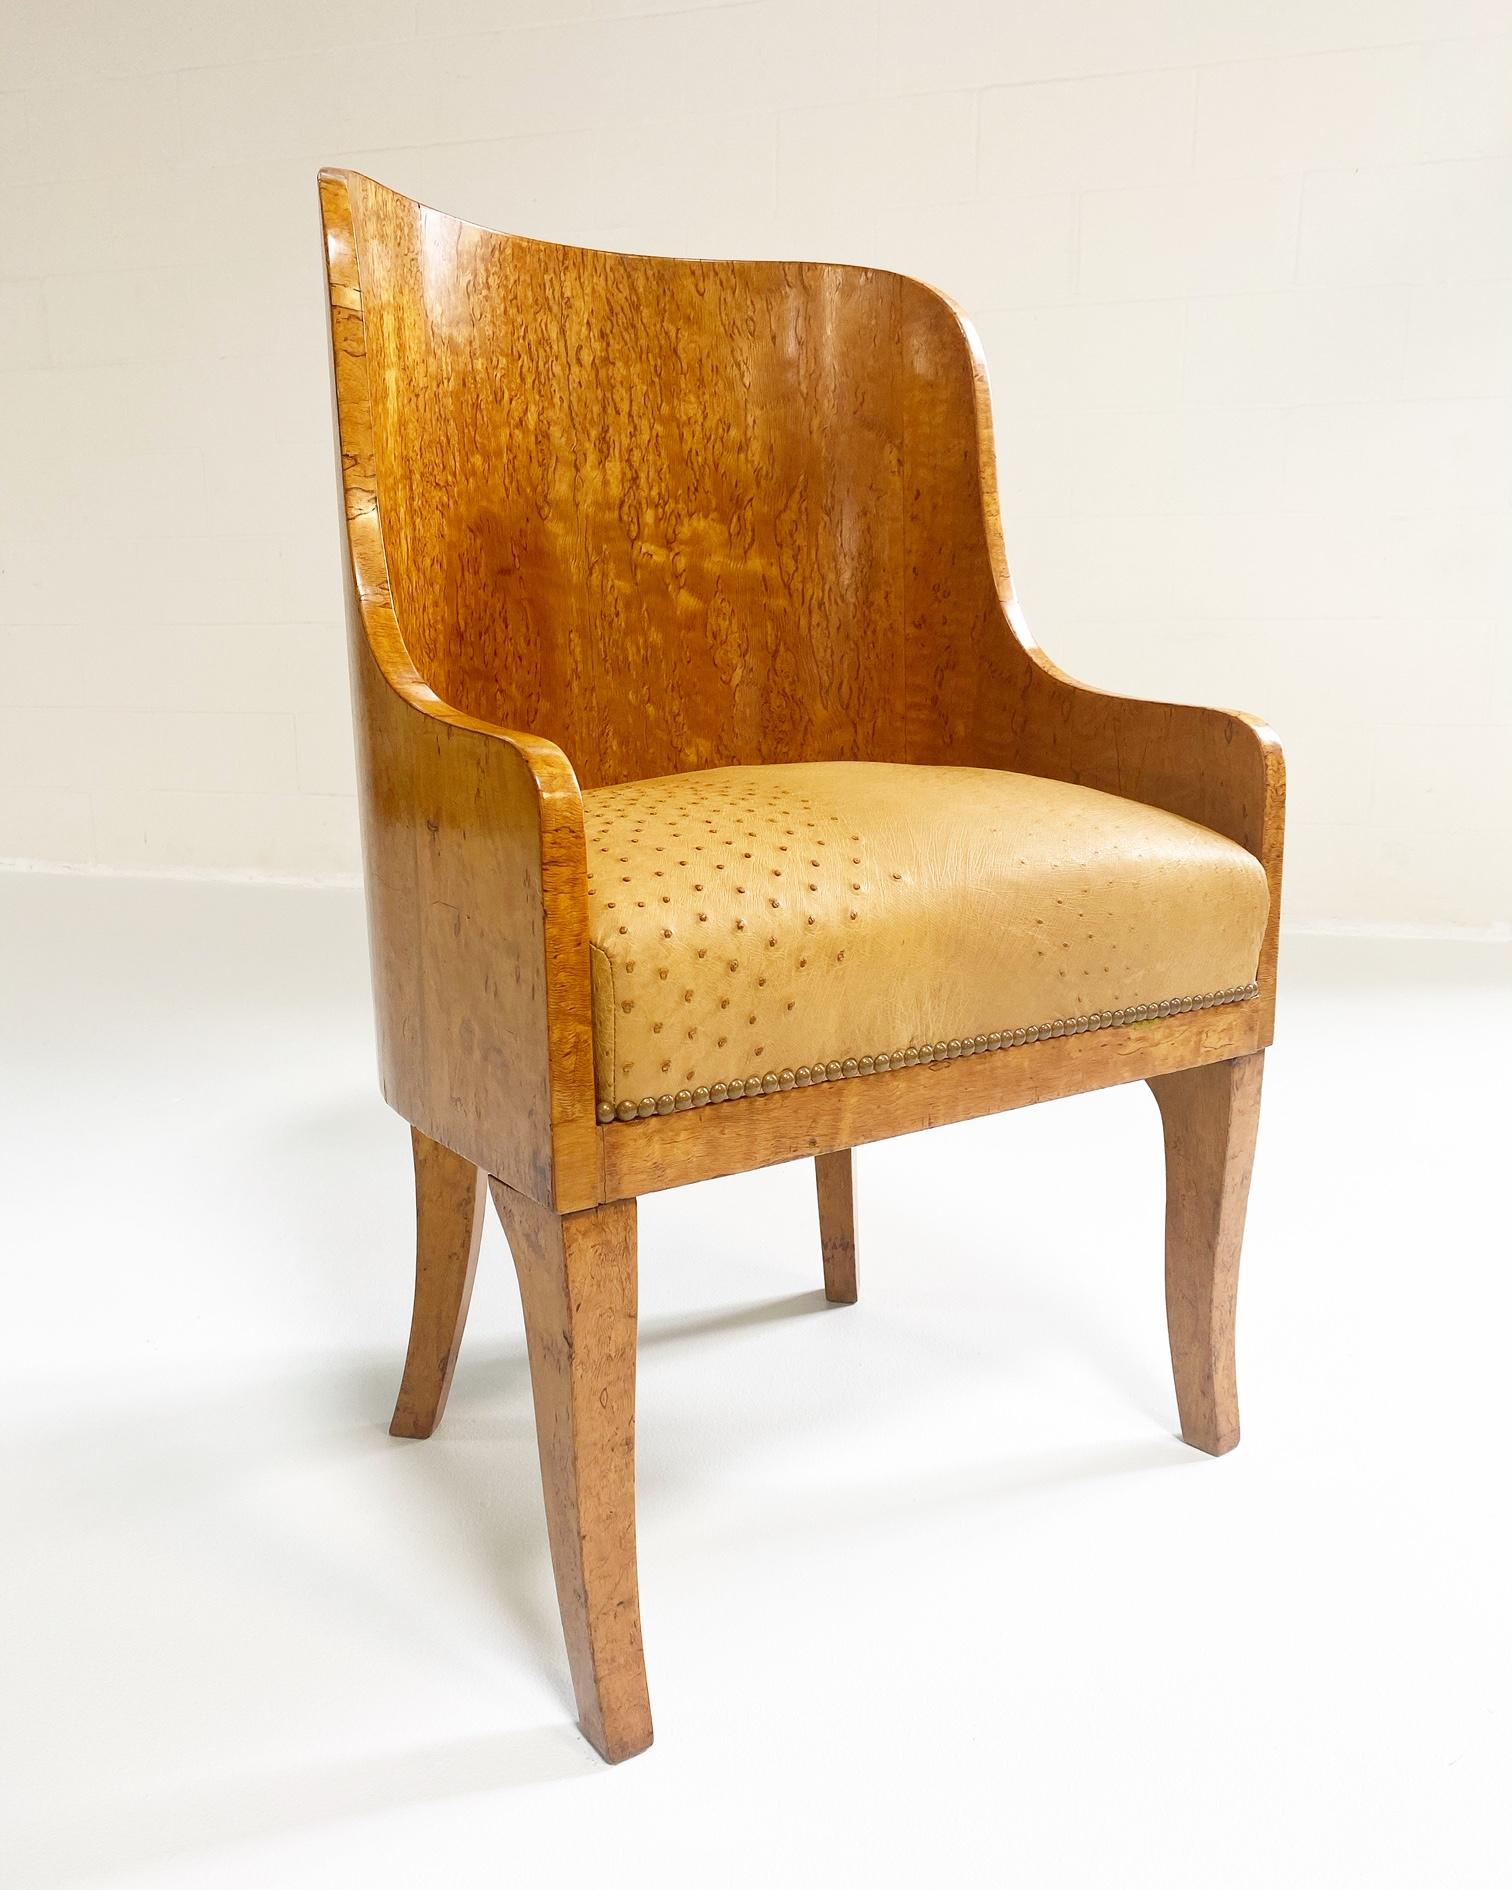 What's cooler? The shape of these chairs or the color. We love the barrel-back forms, the figured backs wrapping around to closed arms, with saber-form legs. And that gnarled birch in the loveliest golden hue. Expertly restored with an ostrich